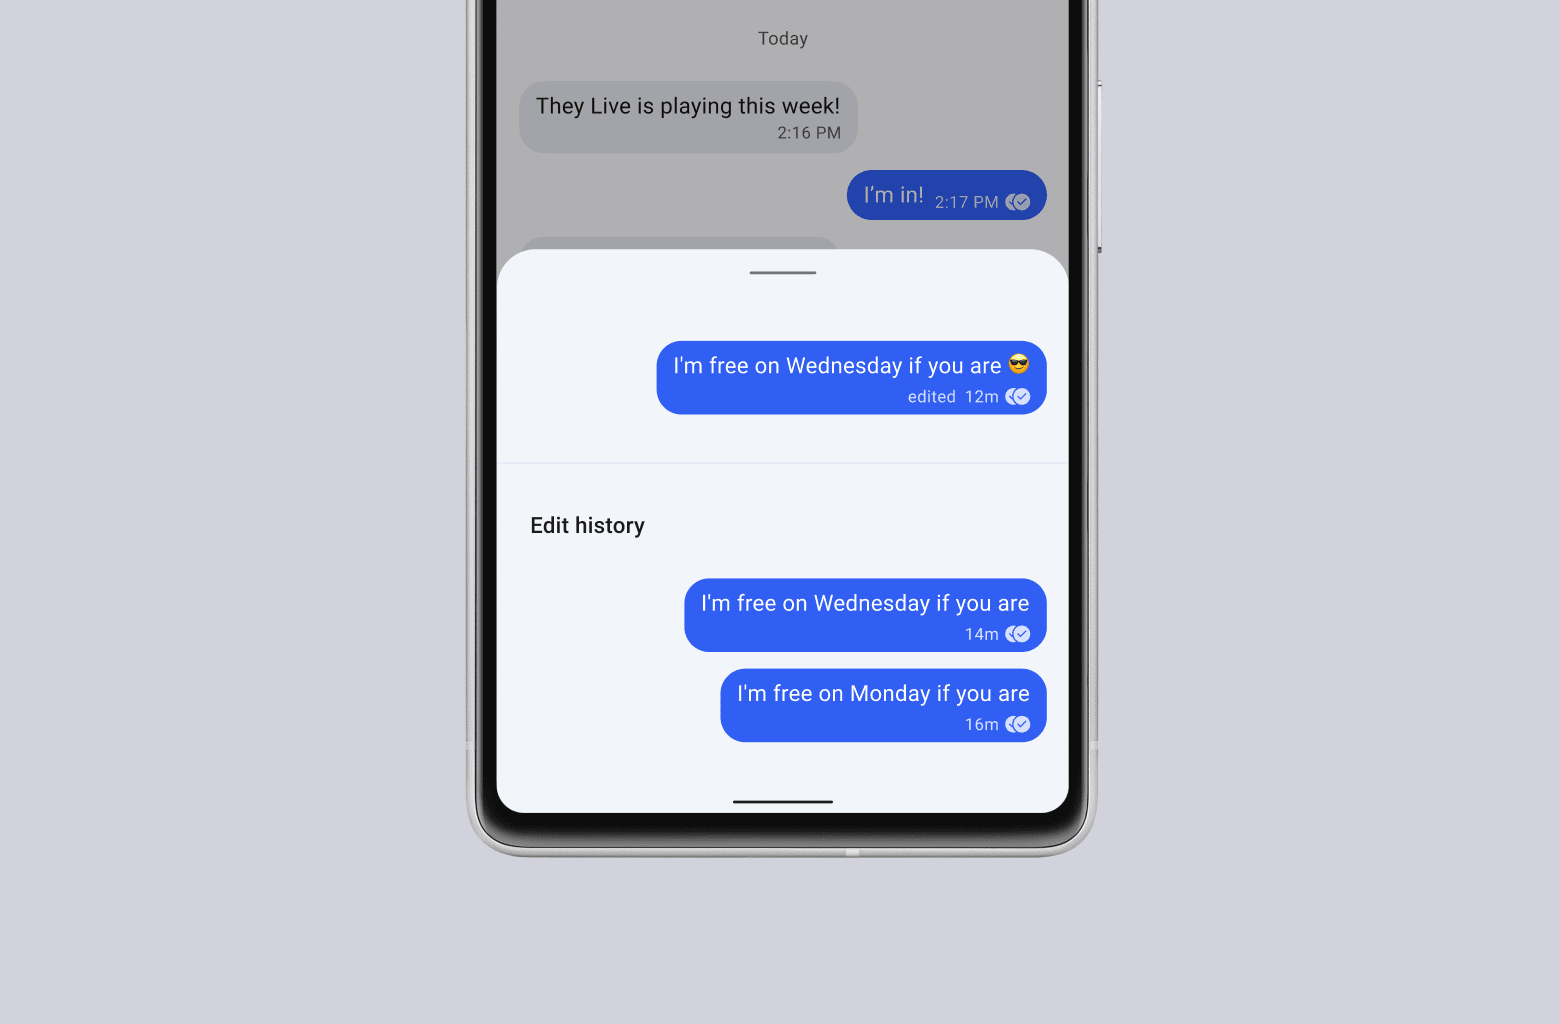 A conversation in Signal where two people are planning to see a movie together. Edit message history shows one person switching their availability from Monday to Wednesday.